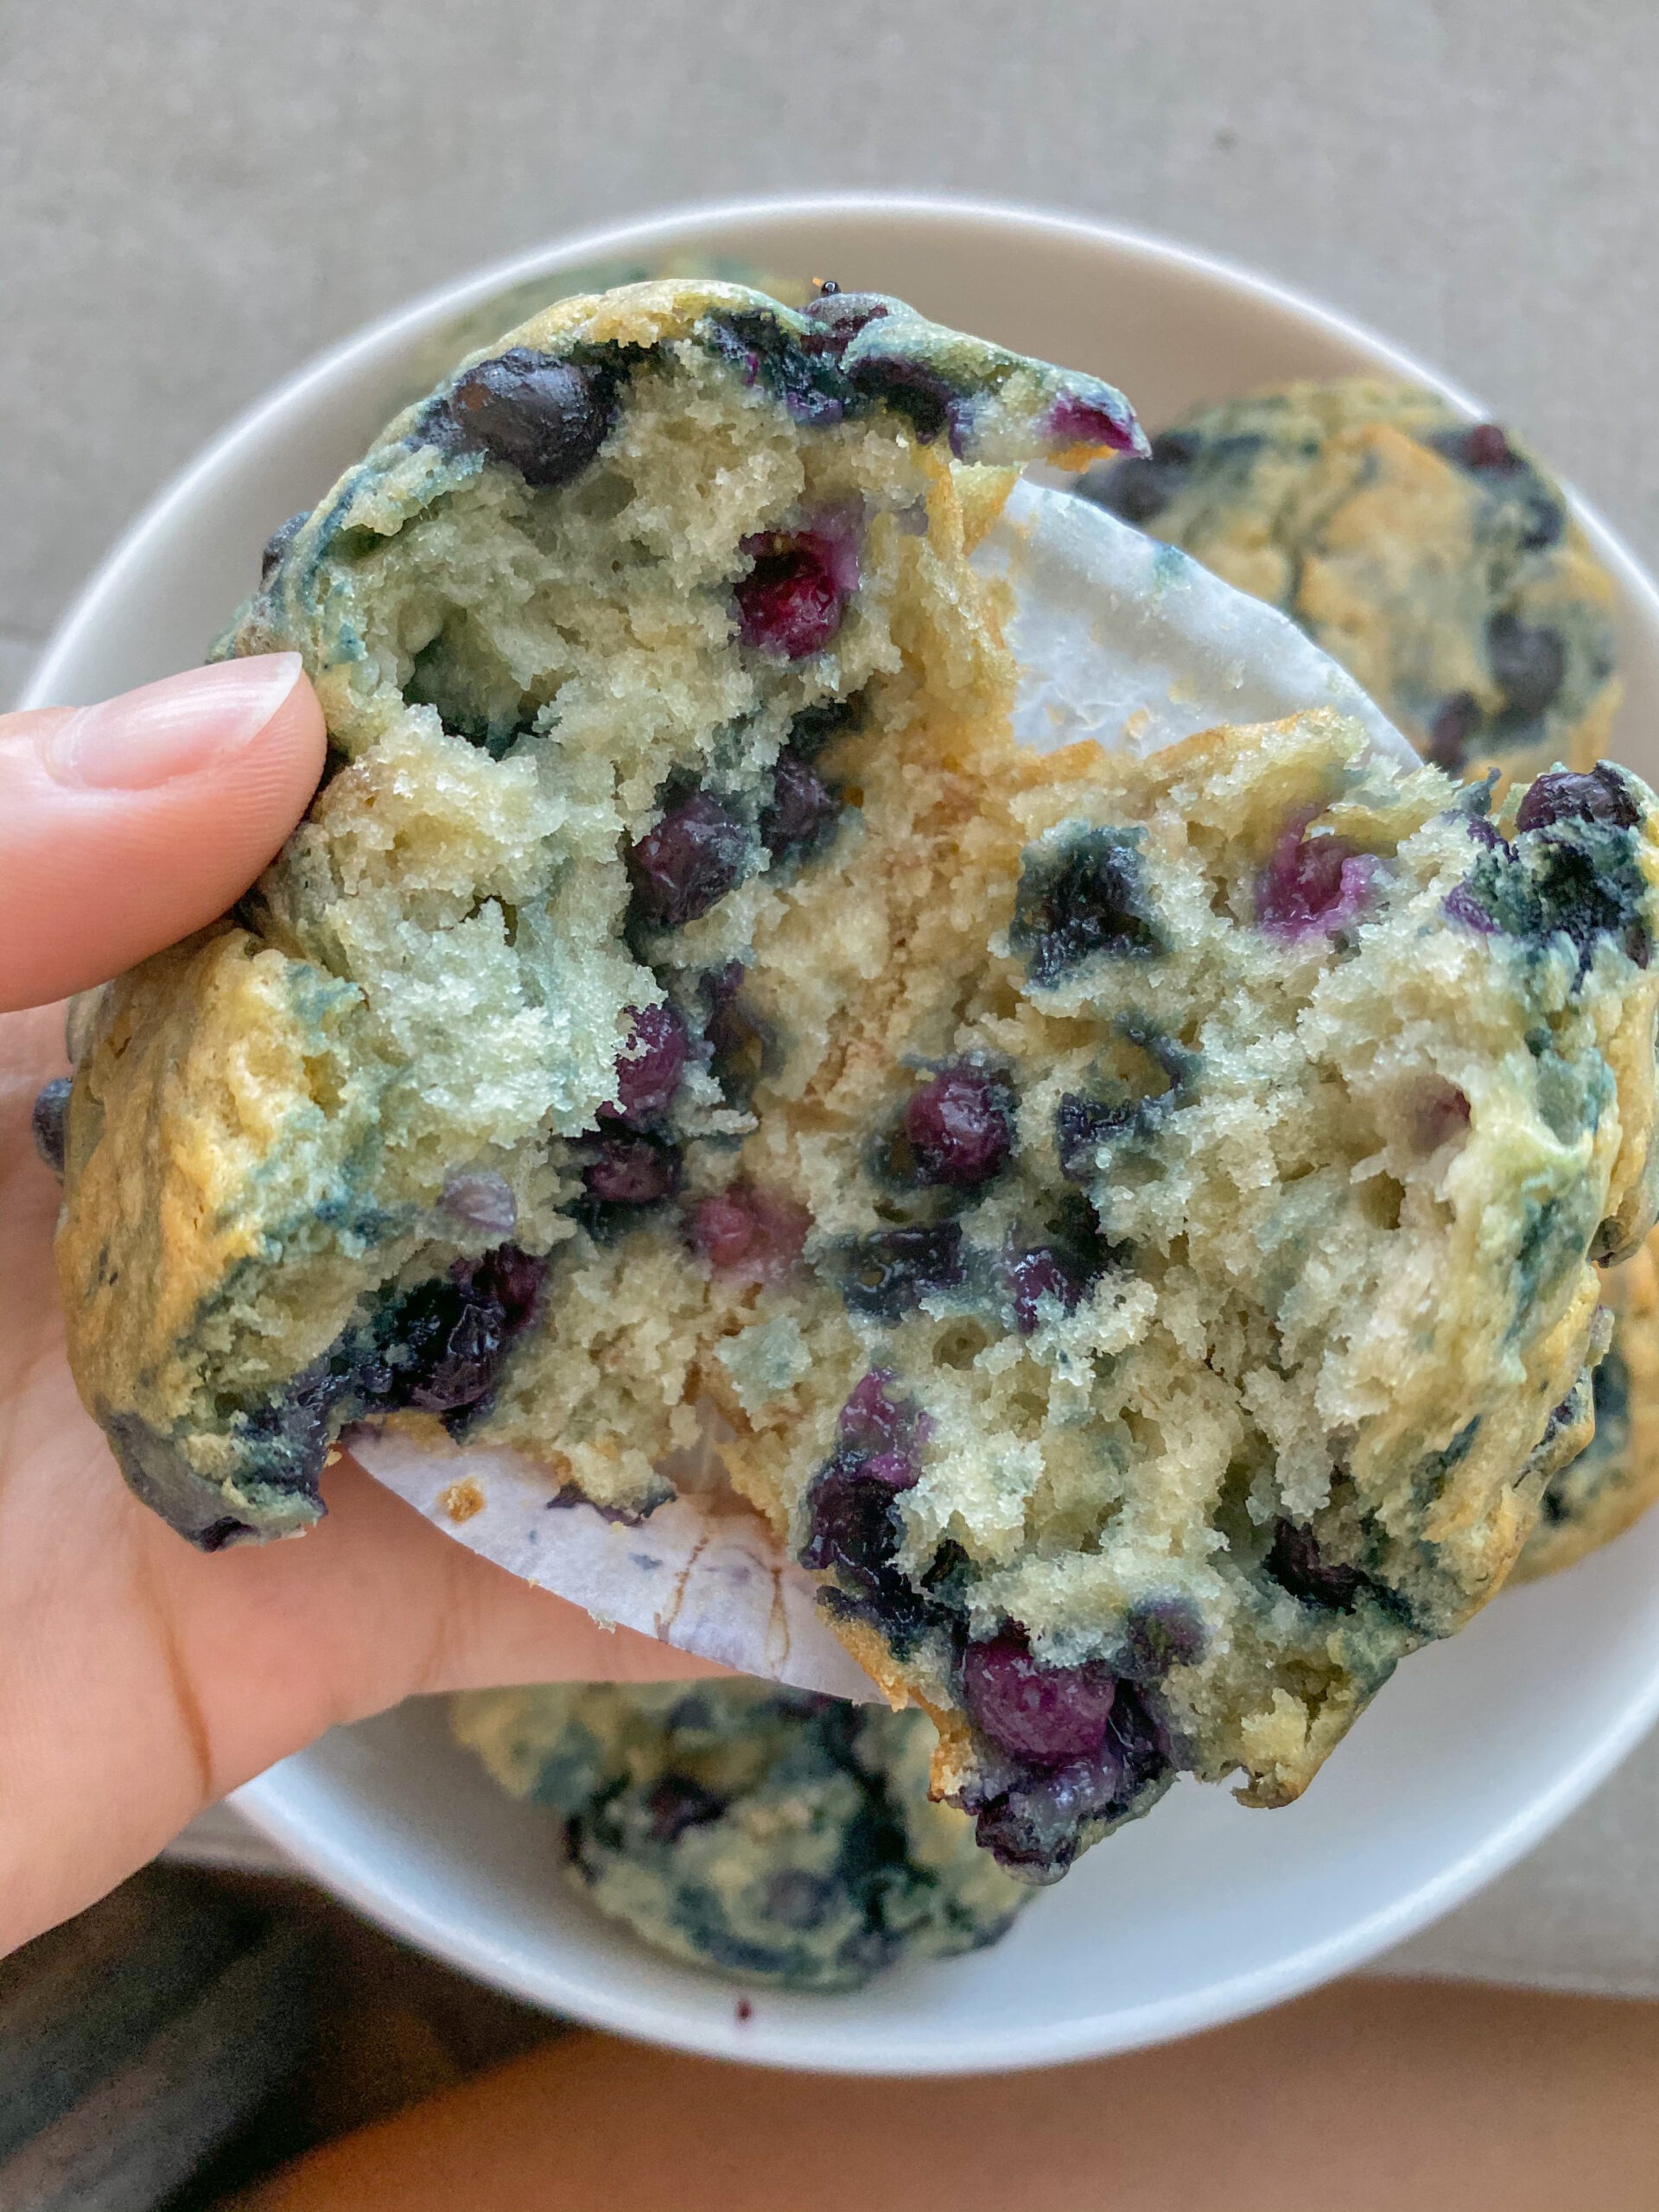 Hand holding blueberry muffin cut in half.